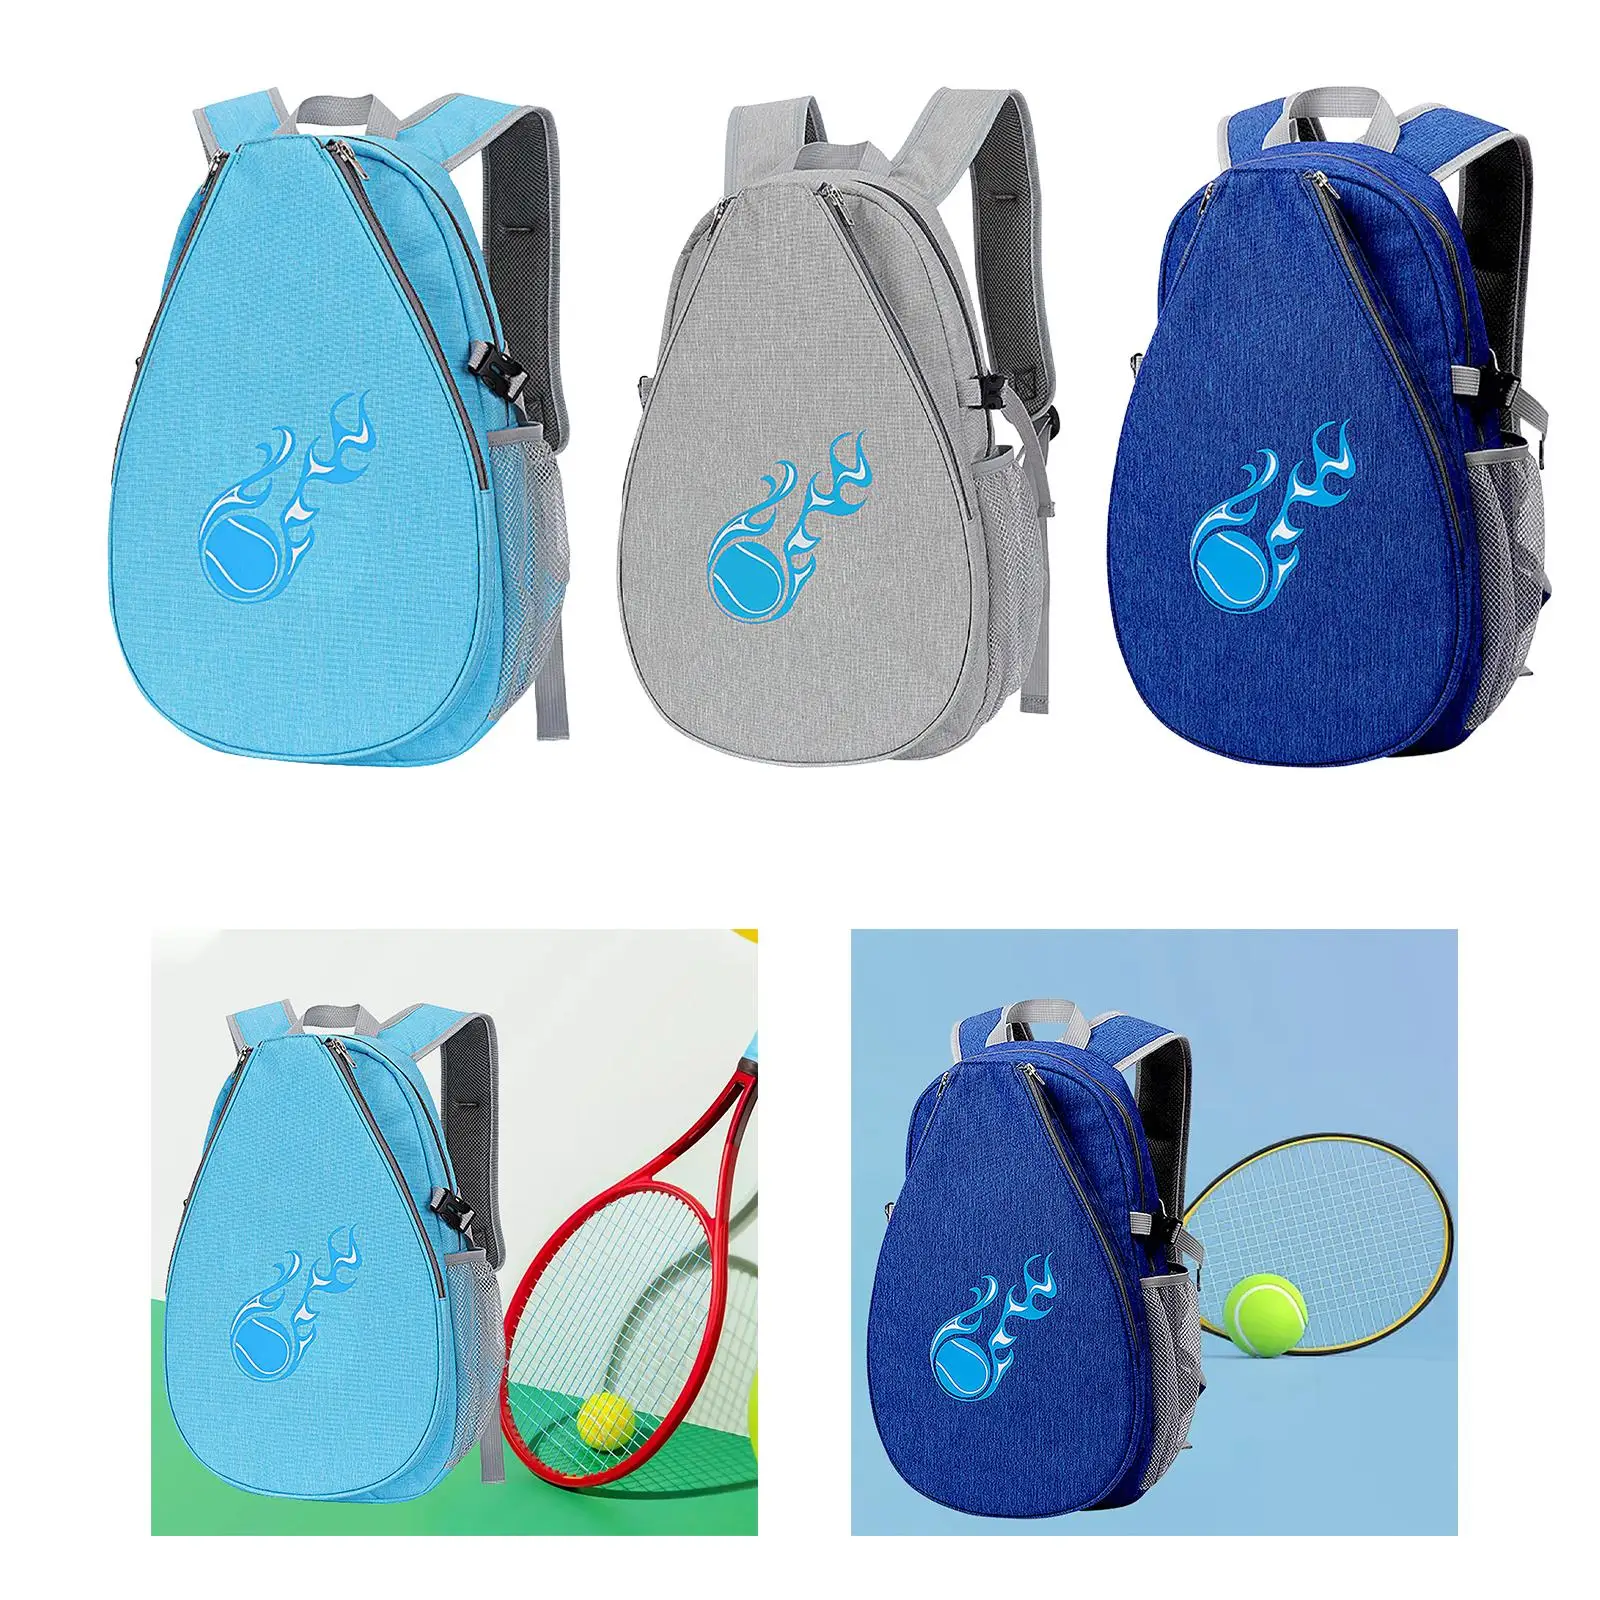 Tennis Backpack Tennis Bag for Pickleball Paddles, Badminton Racquet, Tennis Racket, Squash Racquet, Balls and Other Accessories